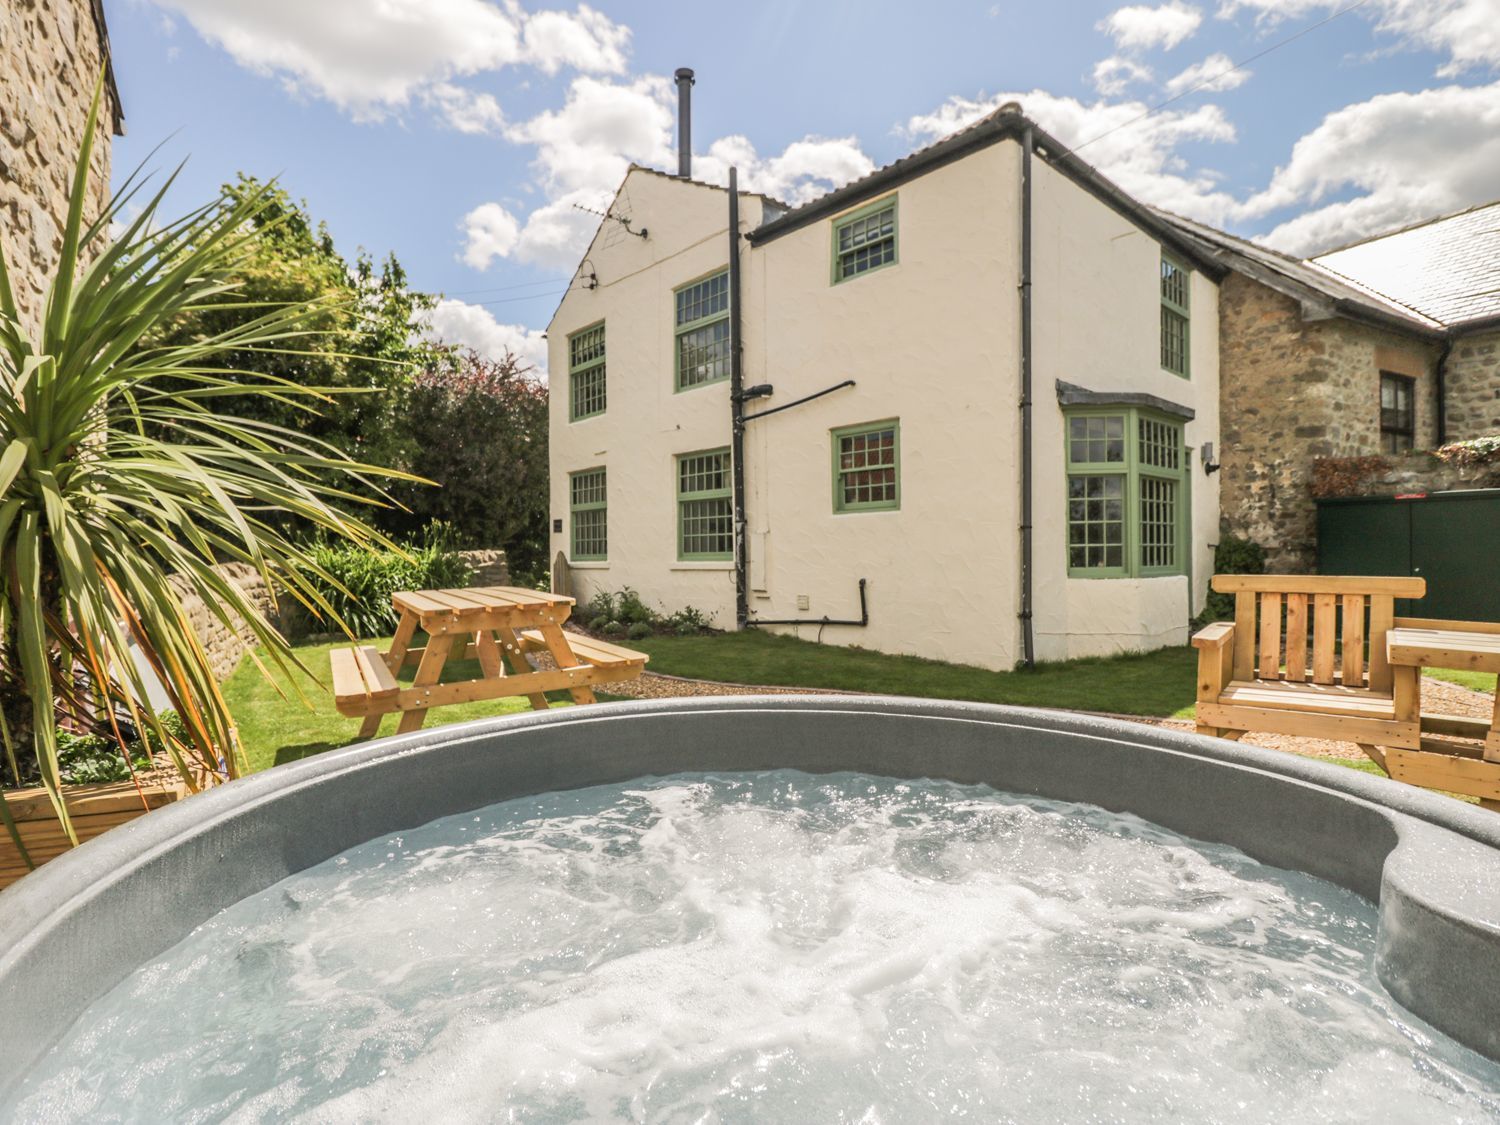 yorkshire-dales-cottage-with-hot-tub